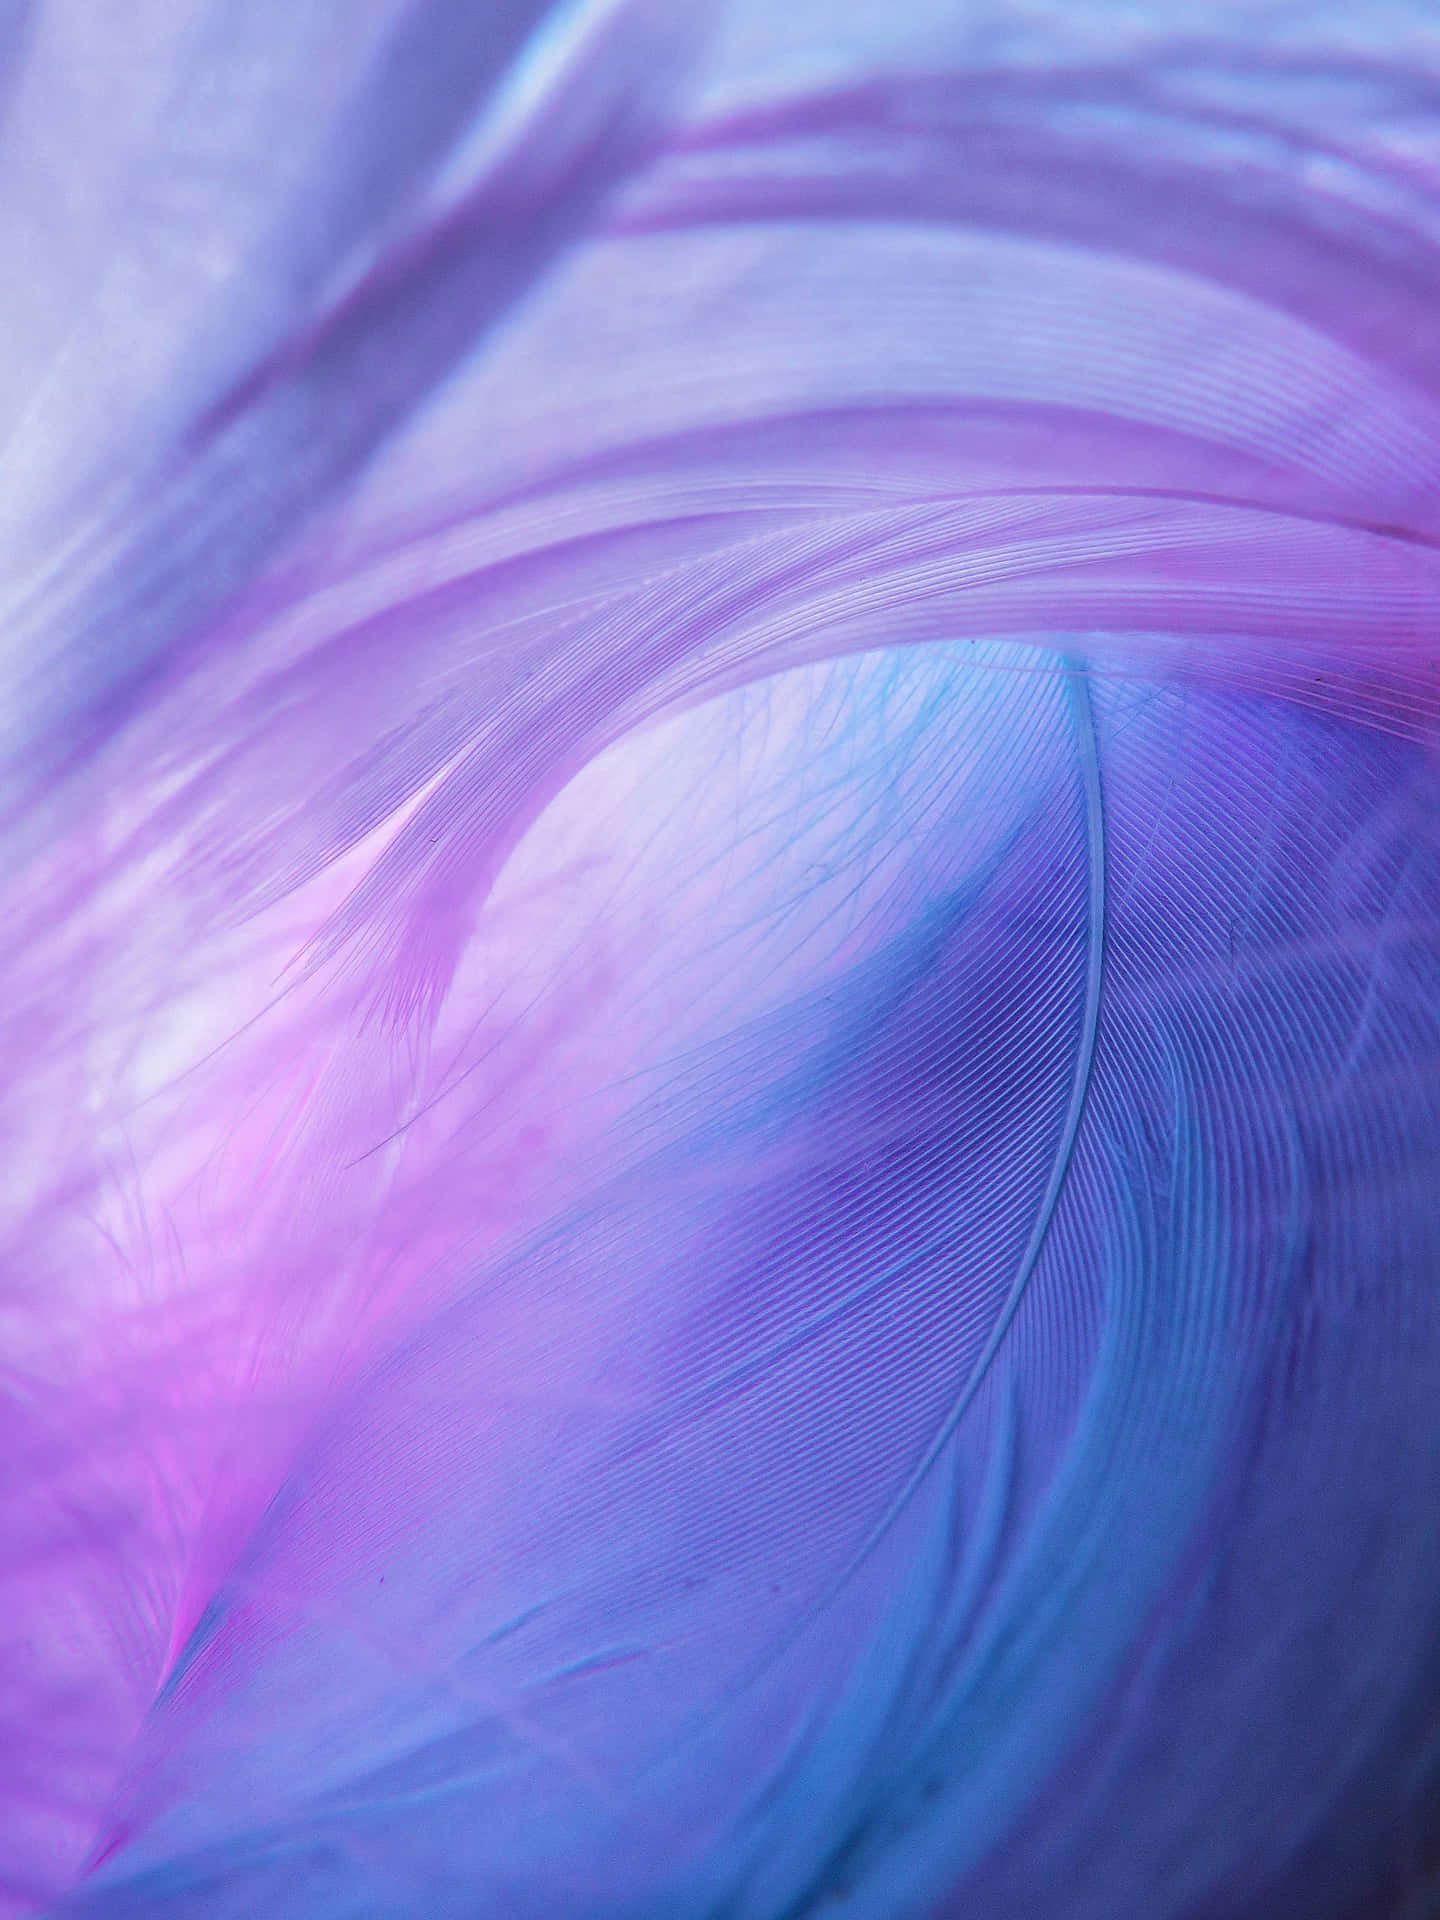 A Purple And Blue Feather With A Swirling Pattern Wallpaper